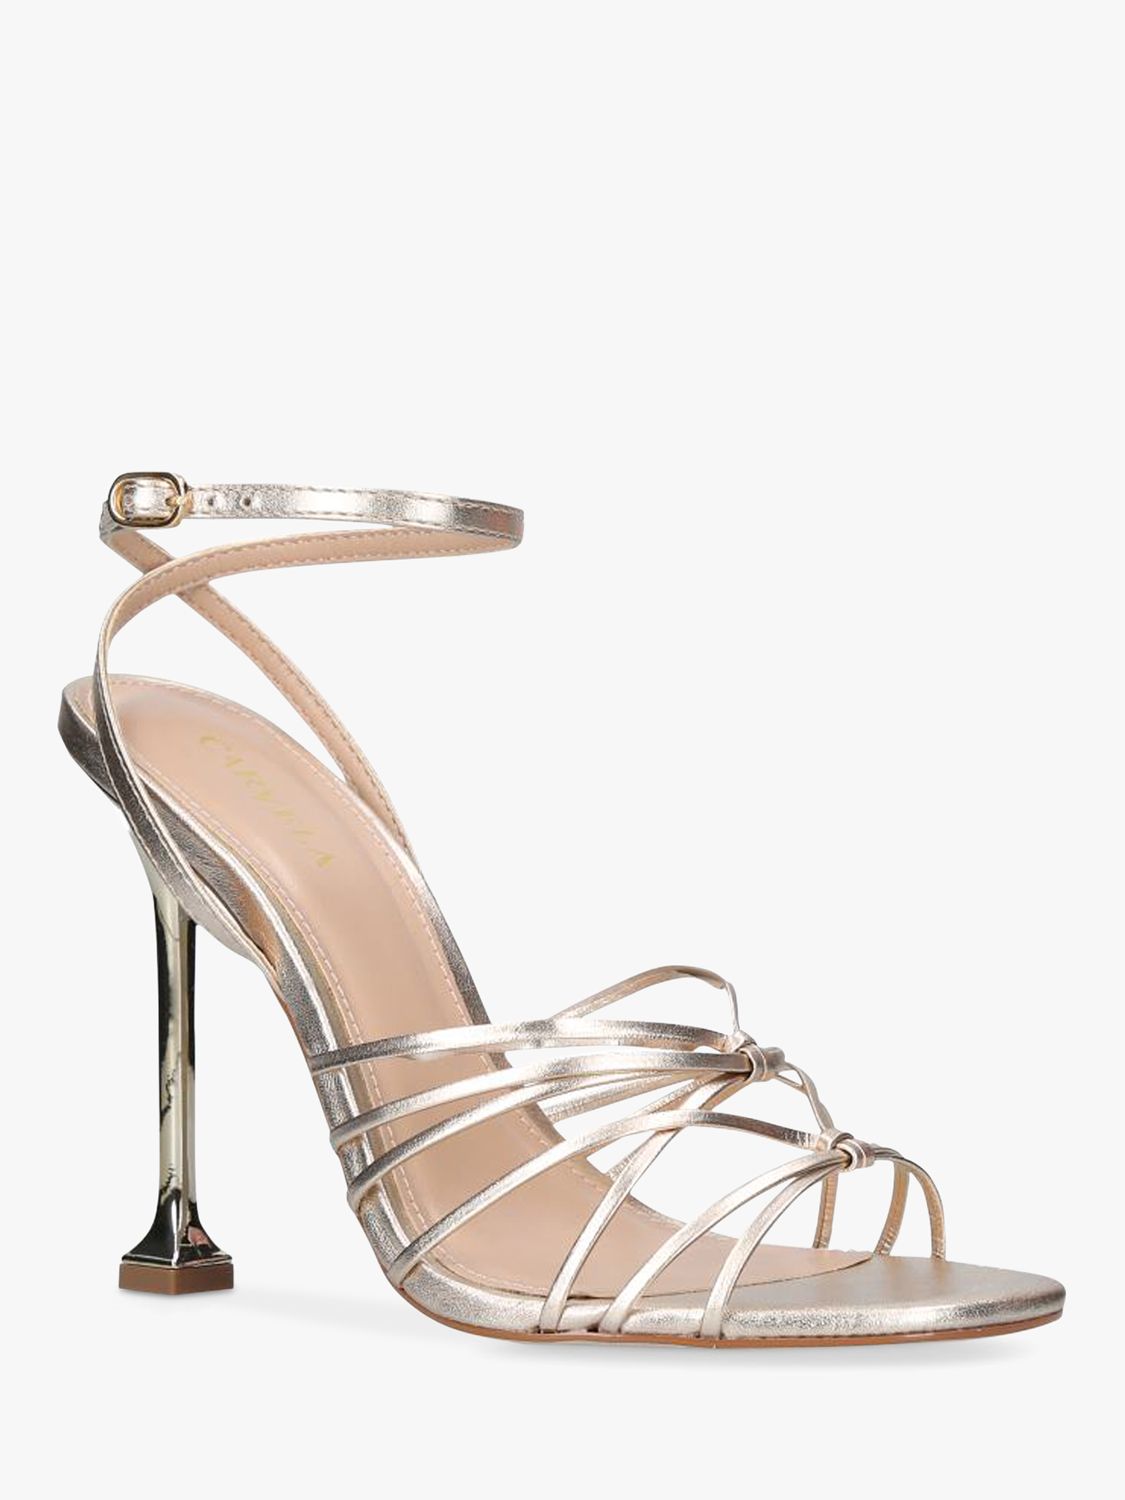 Carvela Glowing Leather Fluted Heel Strappy Sandals, Gold